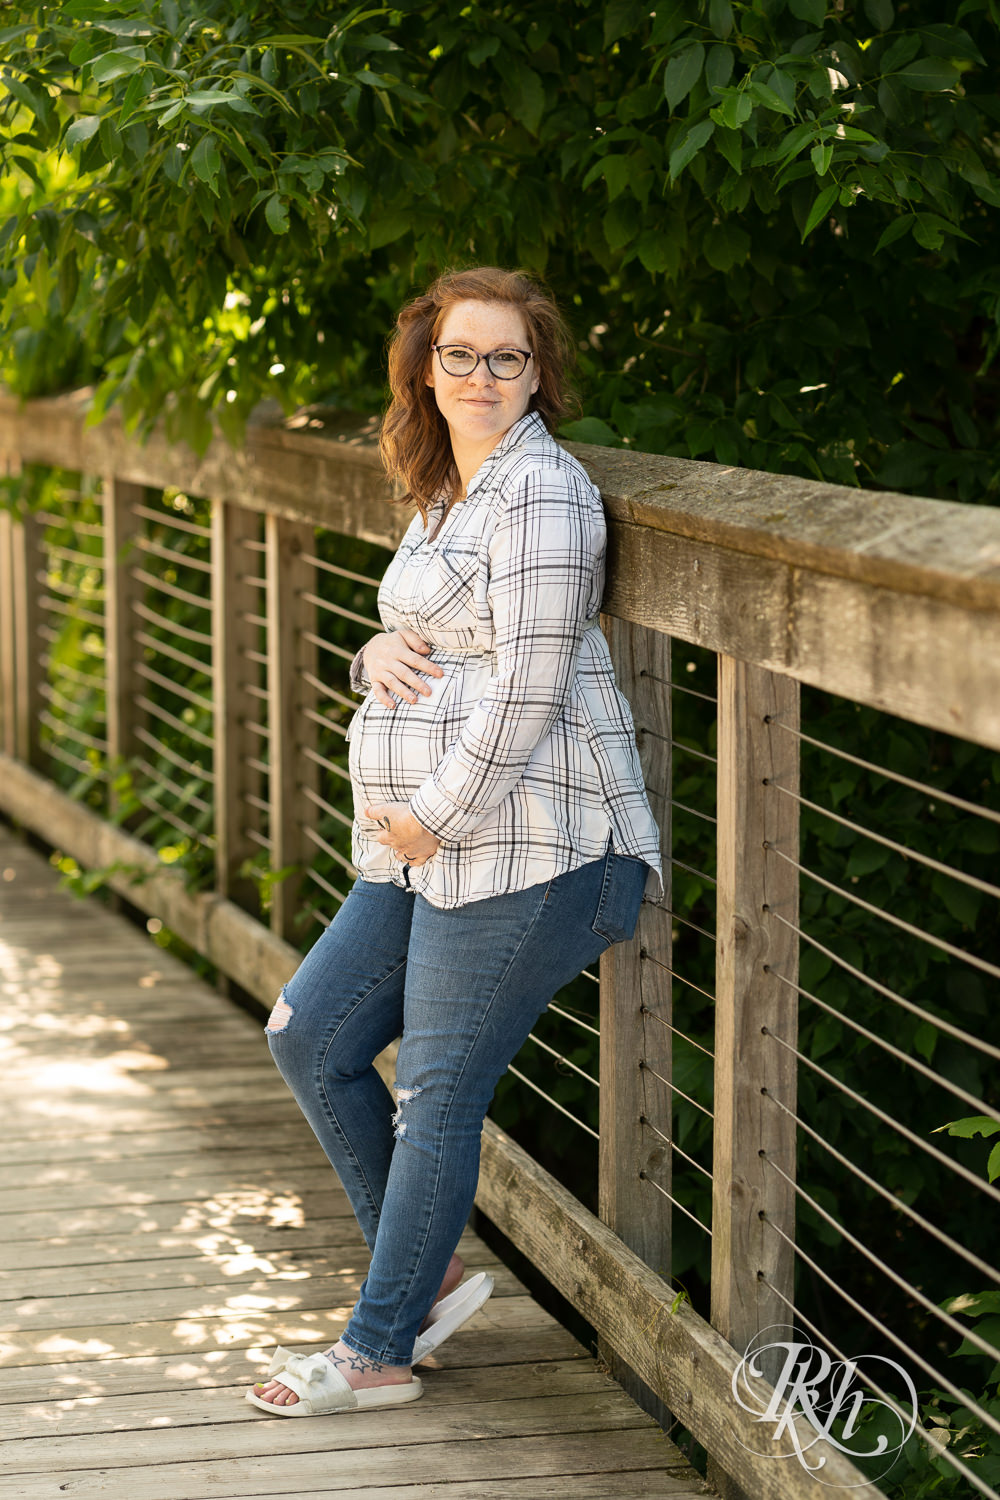 Pregnant woman holds belly at Lebanon Hills Regional Park in Eagan, Minnesota during maternity photography session.